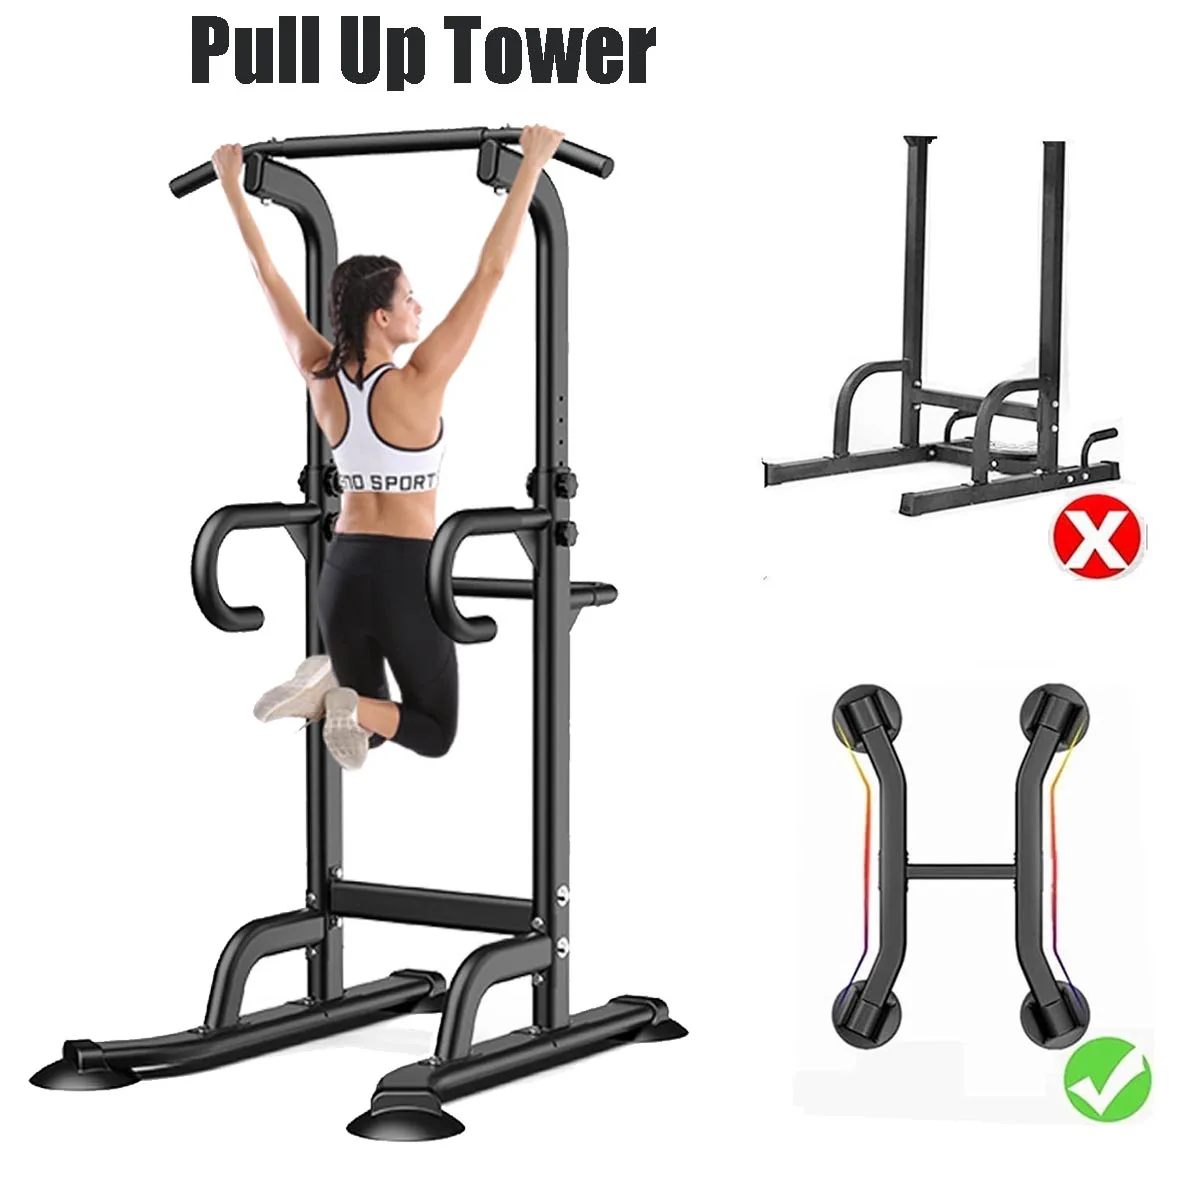 US $91.28 NEW Multifuncional Pull Up Bar Power Tower Home Gym Equipment Abdominal Muscle Trainer Workout Indoor Fitness Equip Sport